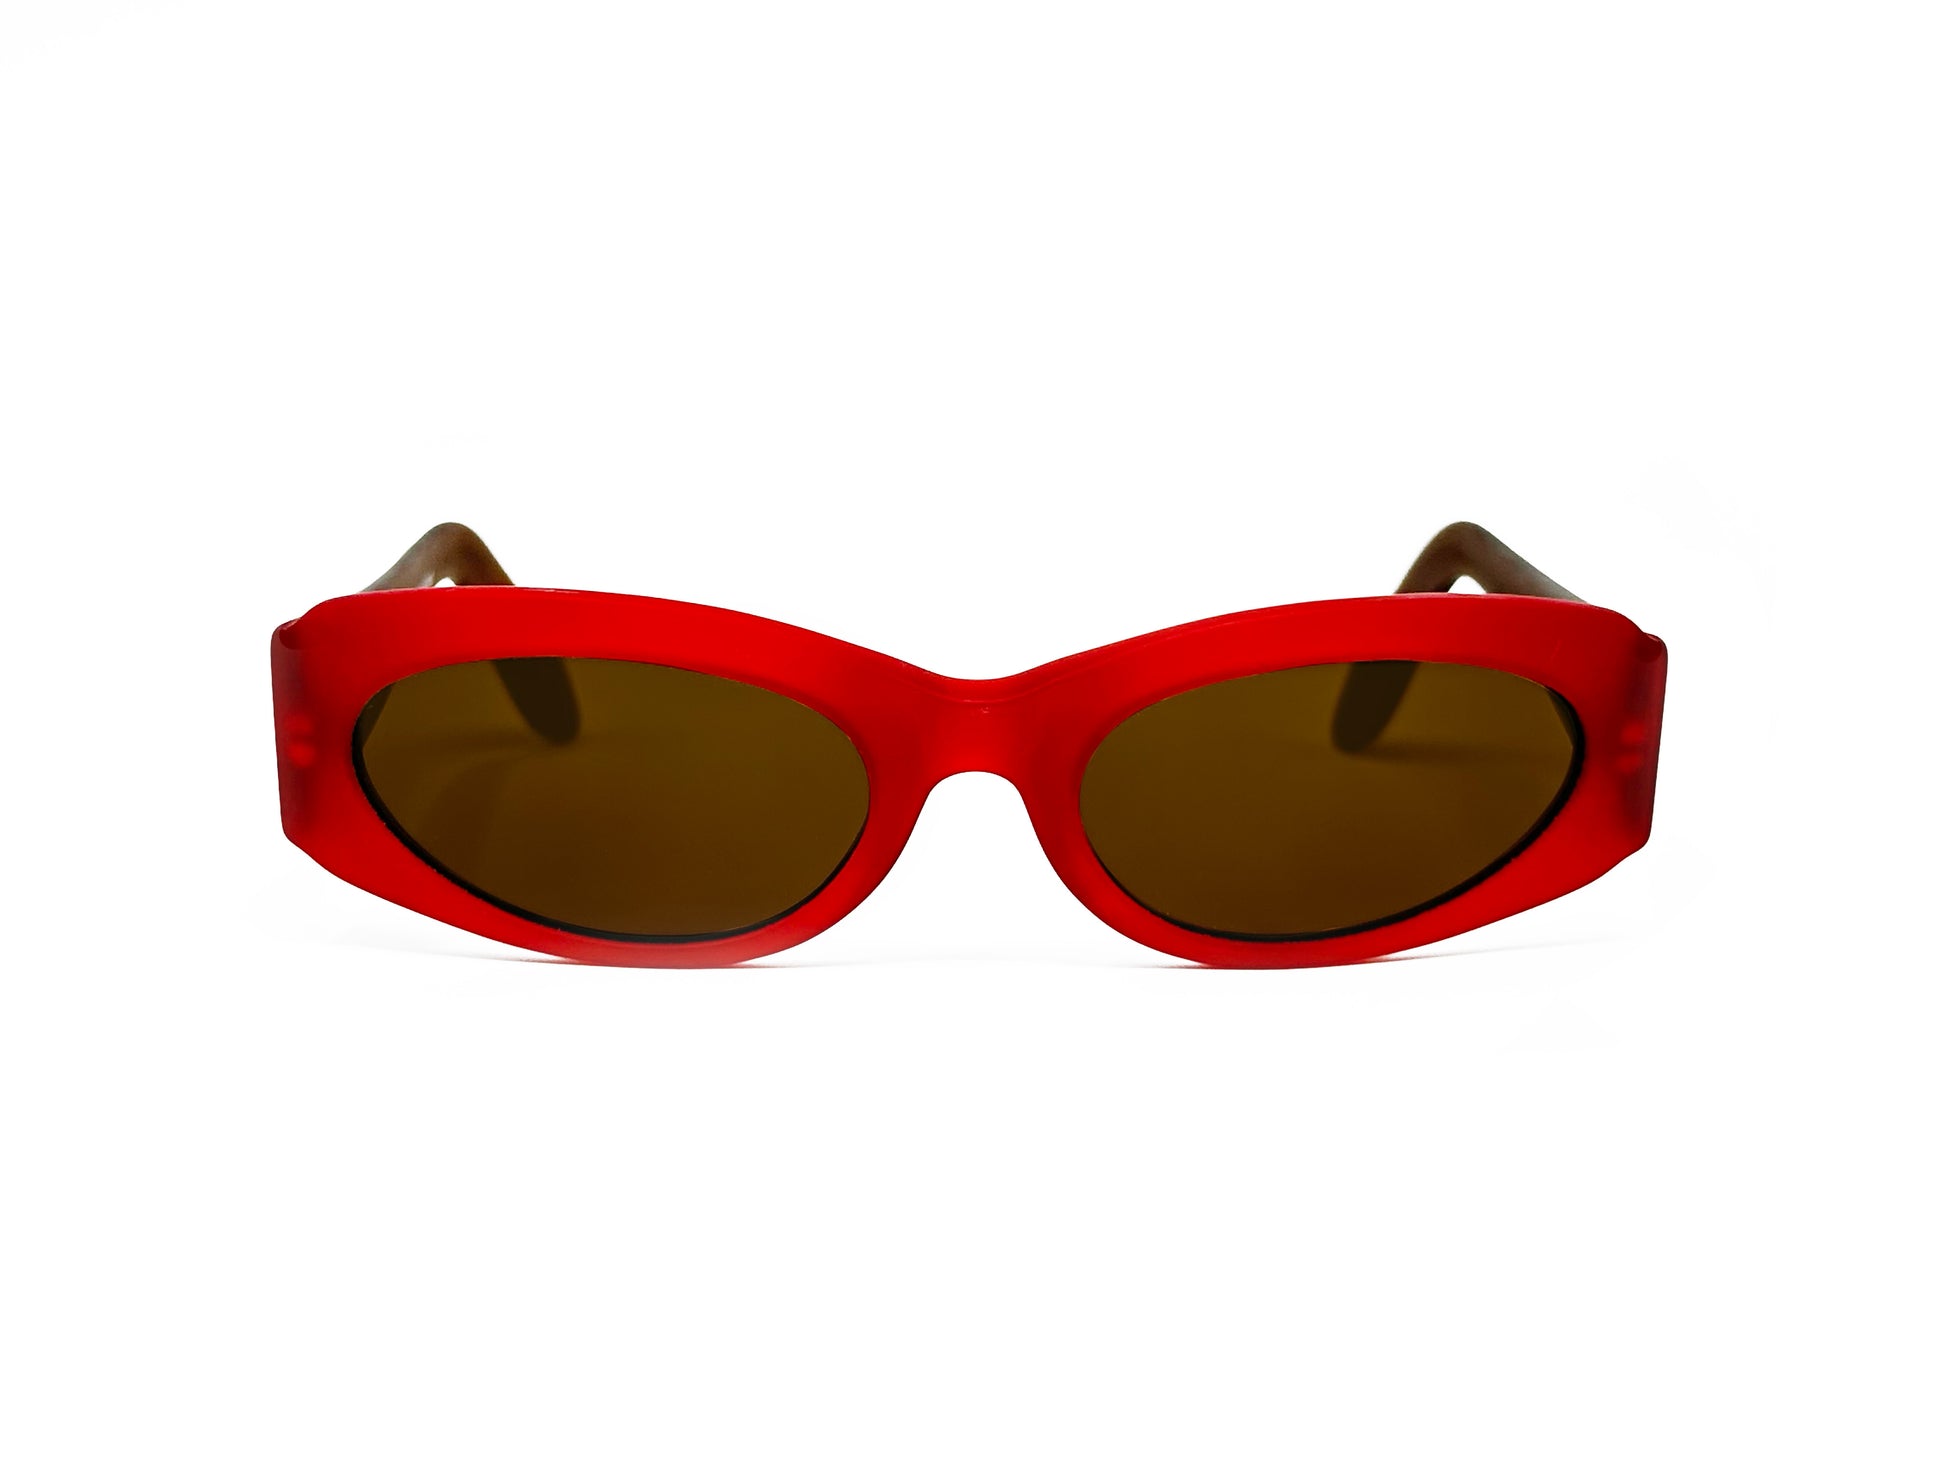 Kador oval sunglass with flat sides. MOdel: DF2006. Color: 6 MATT - Red with light brown lenses. Front view.